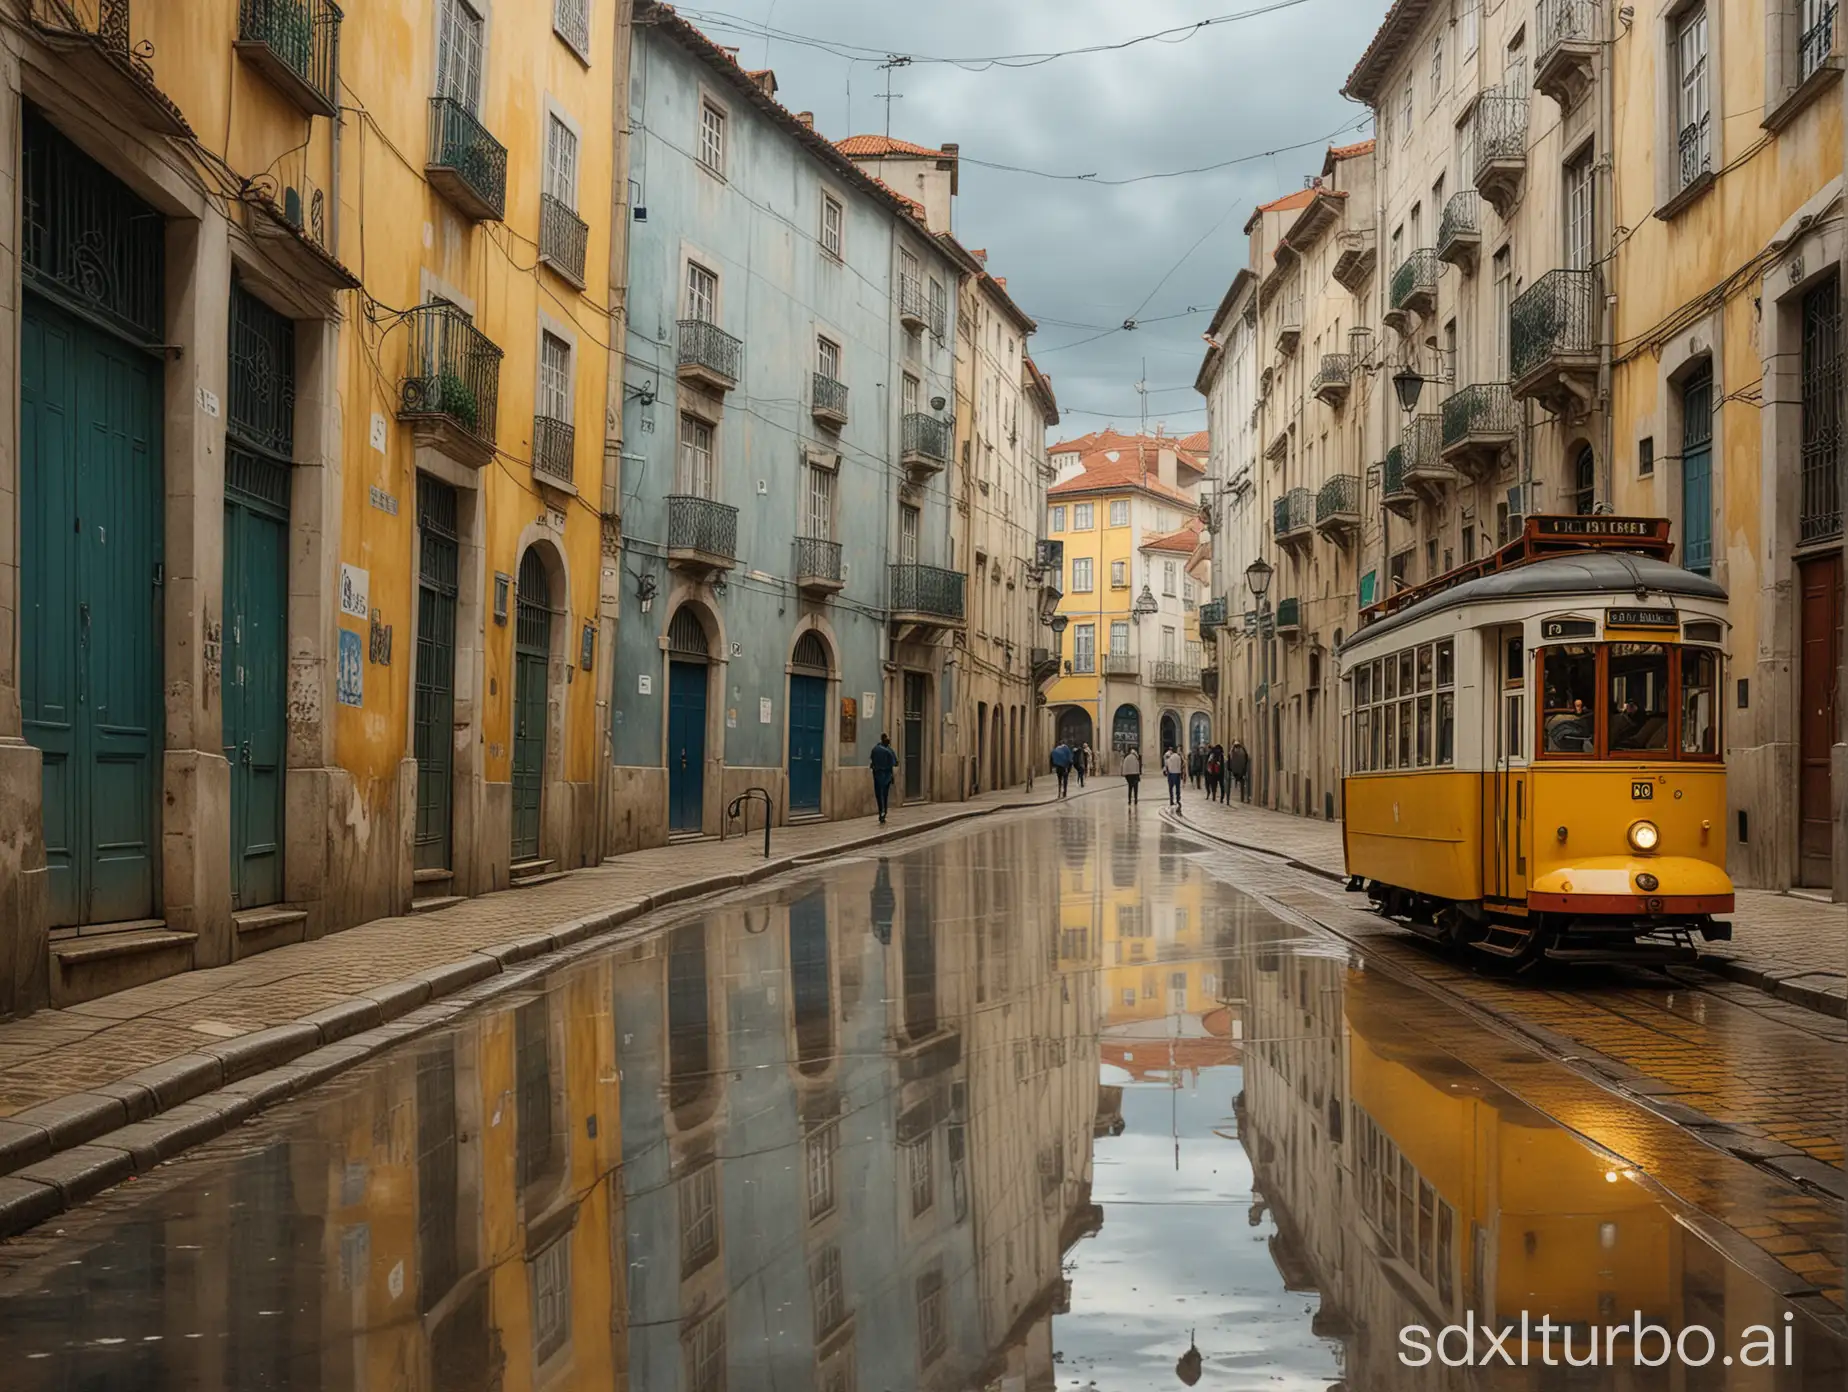 Enchanting-Lisbon-Street-Scene-with-Yellow-Tram-and-Rooster-Tile